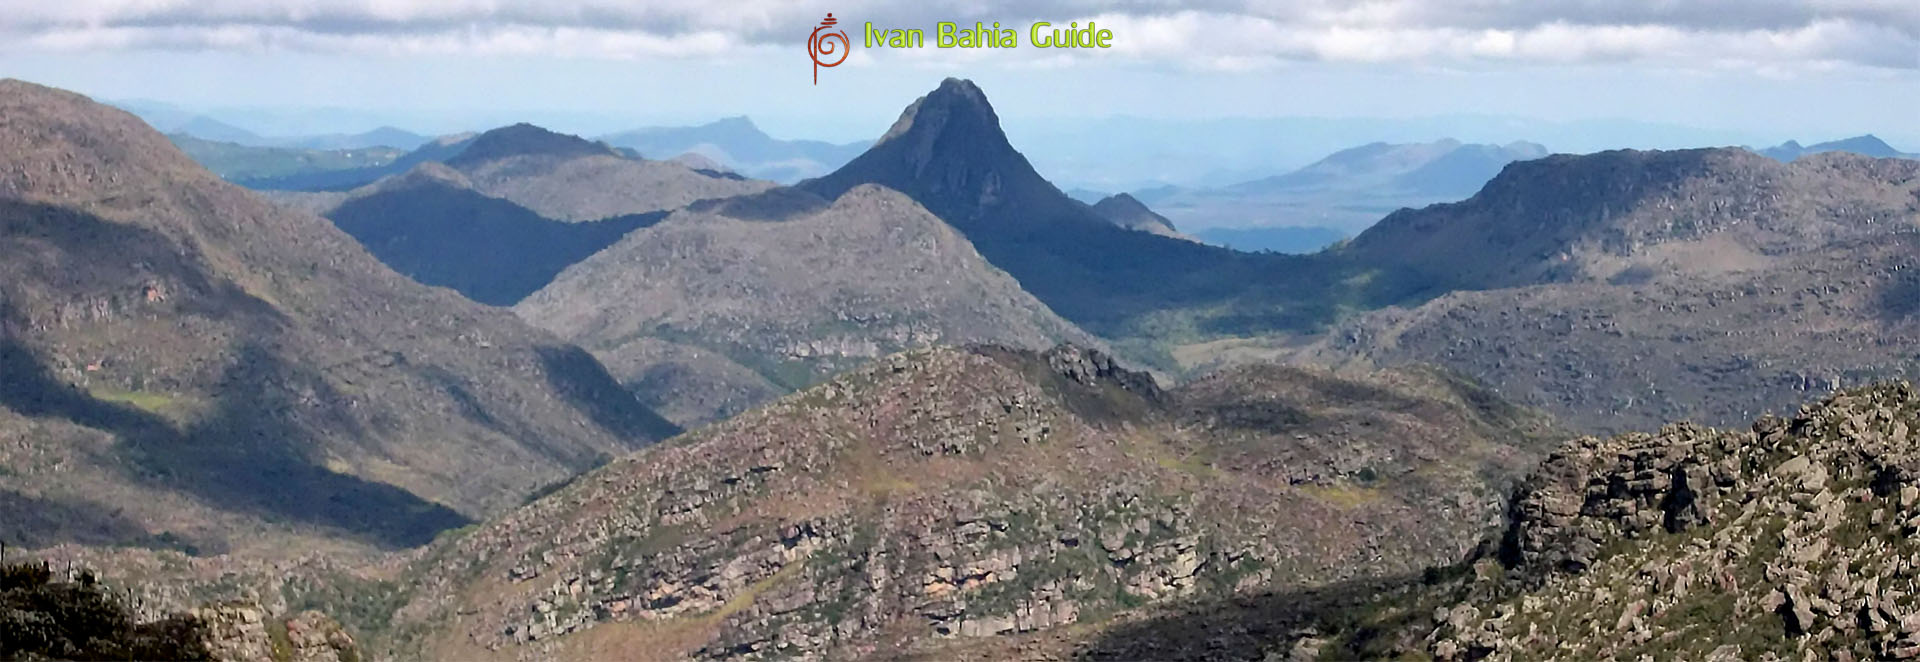 Ivan Bahia tour-guide / takes you to the roof of Bahia in Chapada Diamantina National Park for a trekking to the highest peaks (+2000m) of the North-East of Brazil